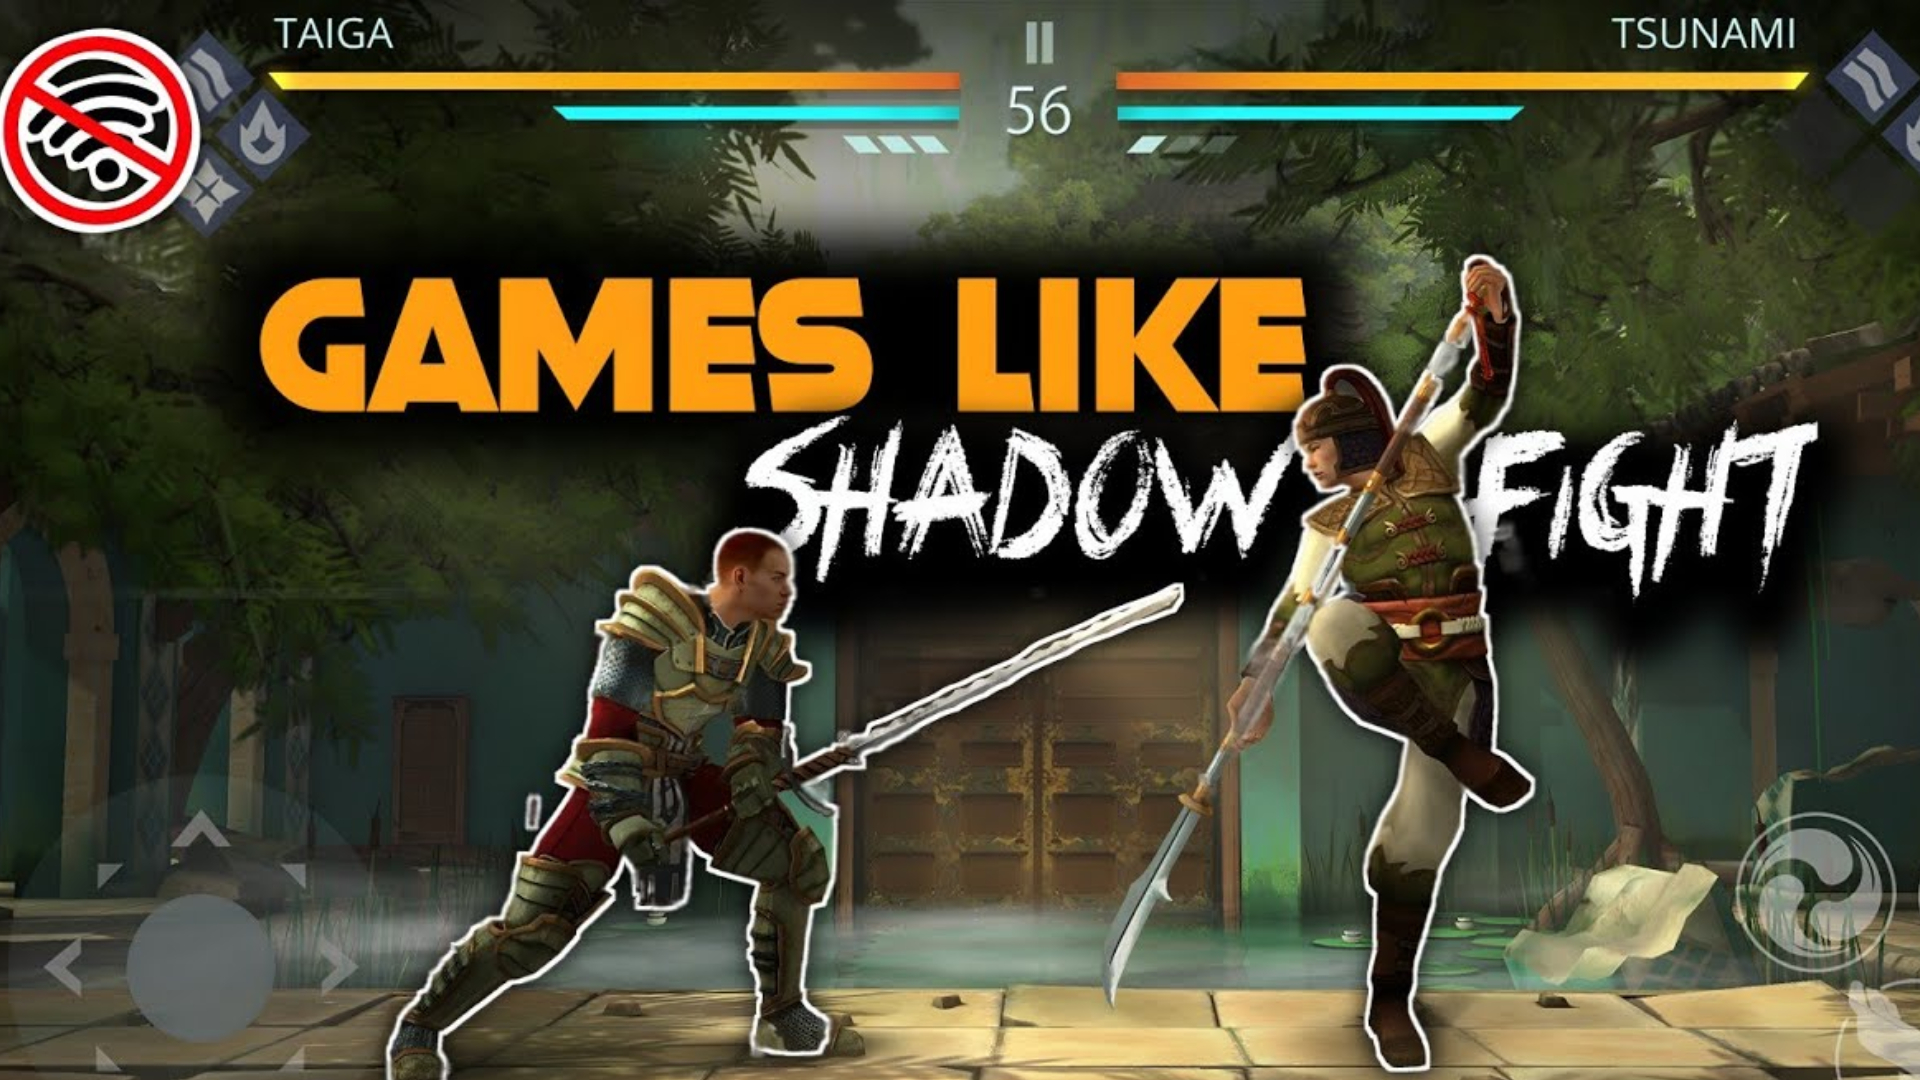 Top 8 Best Games Like Shadow Fight 2 on Mobile